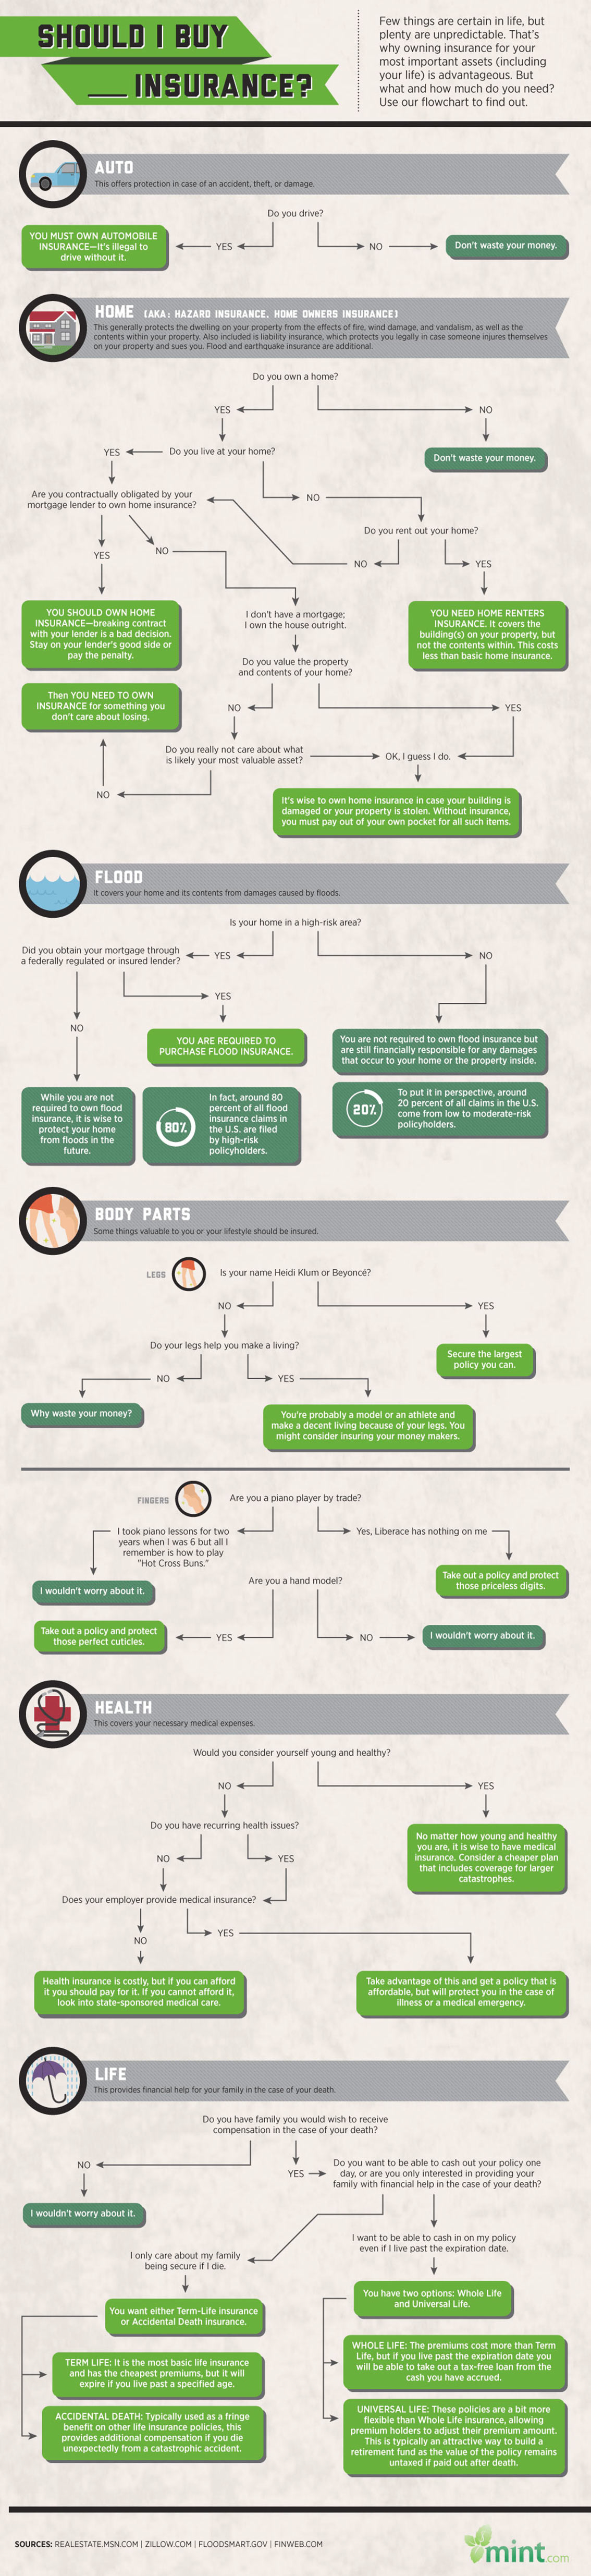 Should I Buy Insurance Infographic